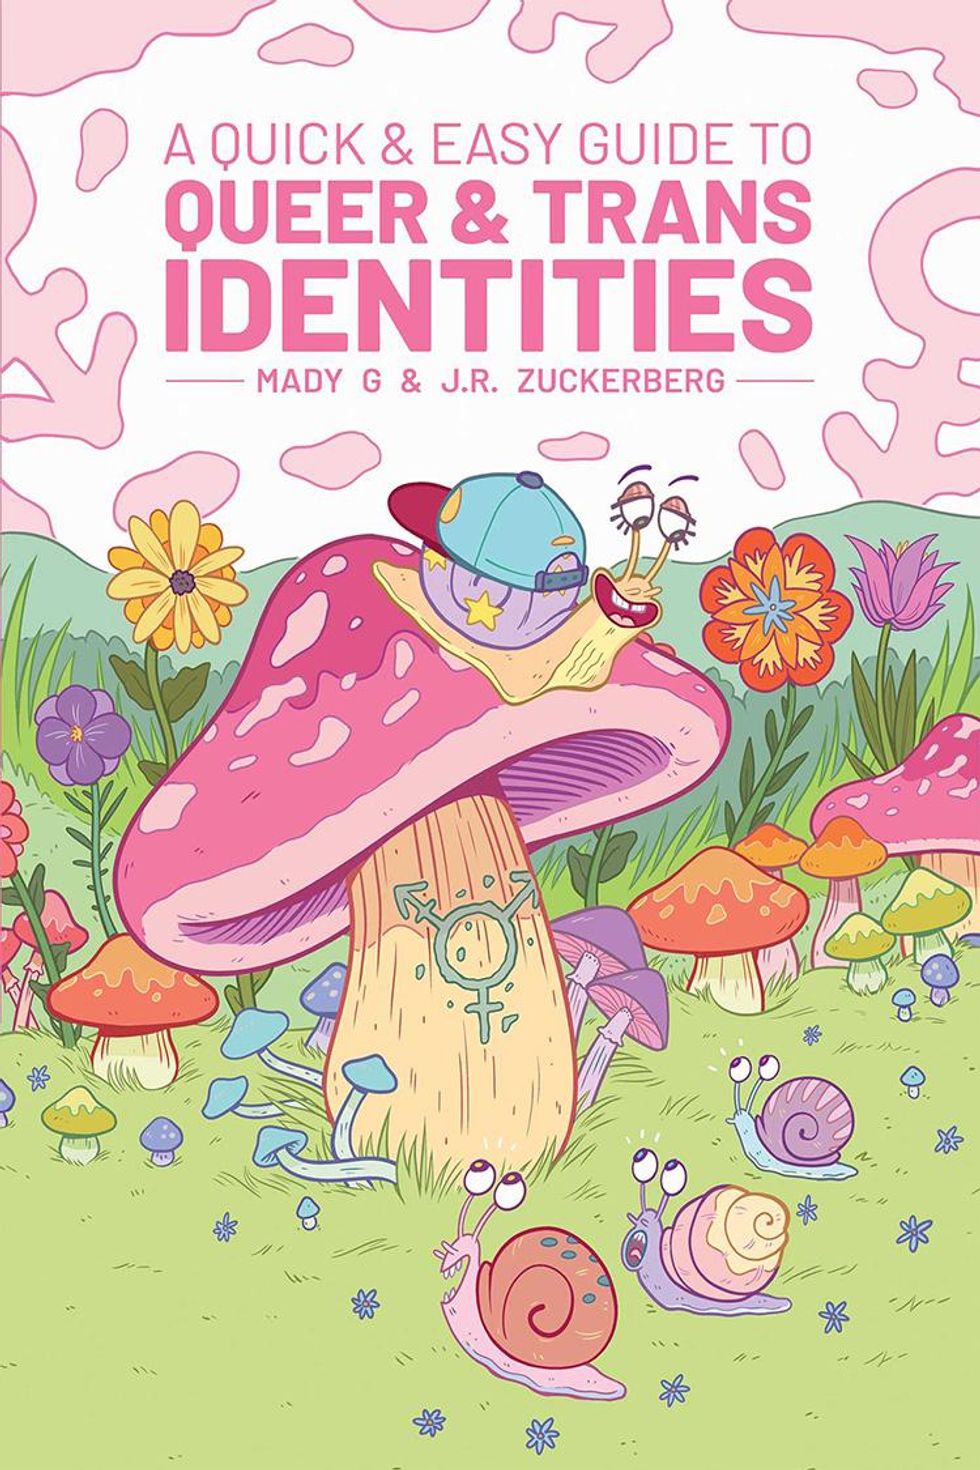 Cover of A Quick & Easy Guide to Queer & Trans Identities featuring pink mushroom and snails